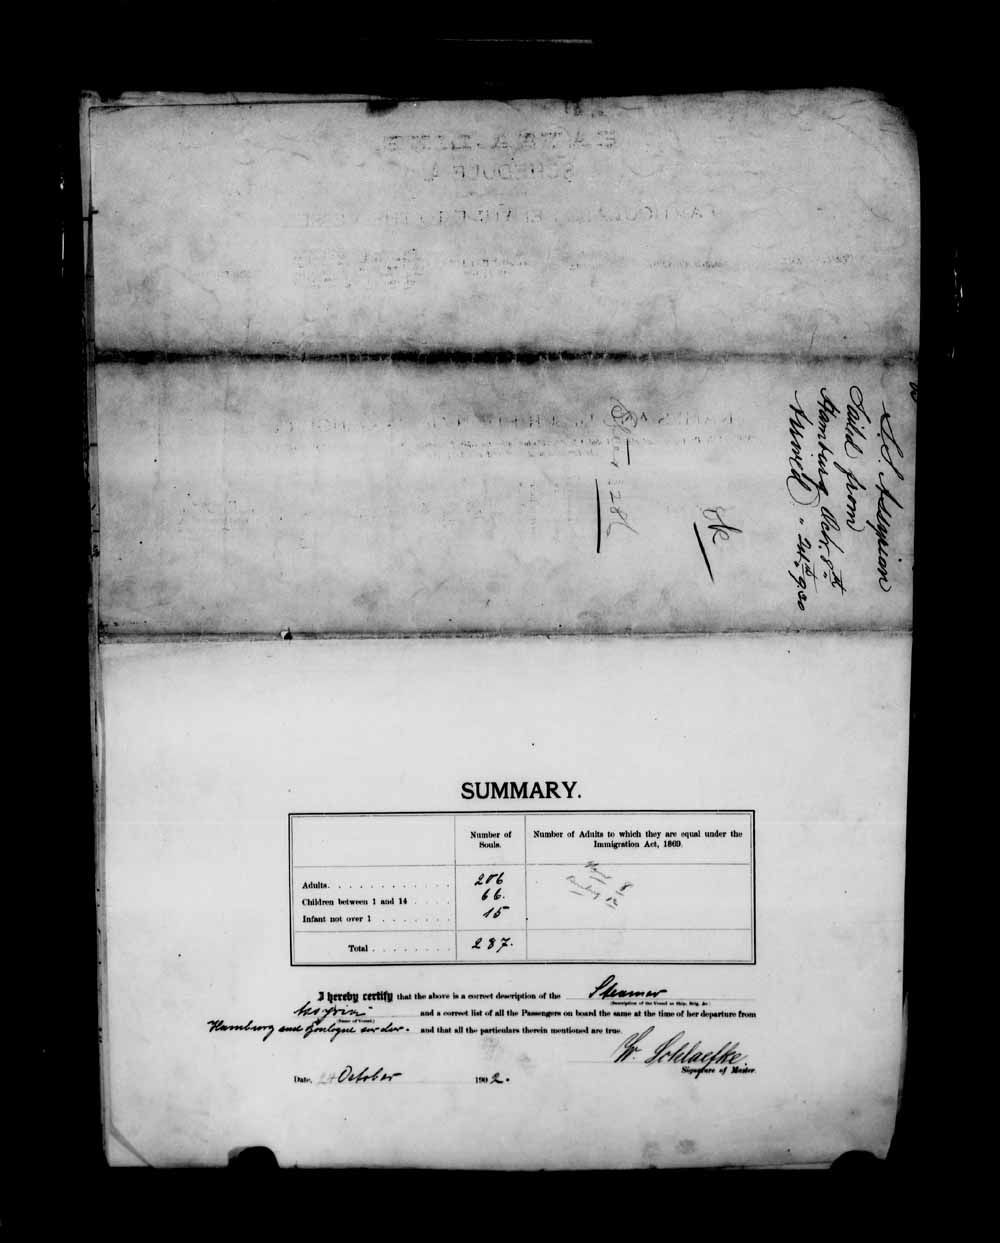 Digitized page of Passenger Lists for Image No.: e003691369